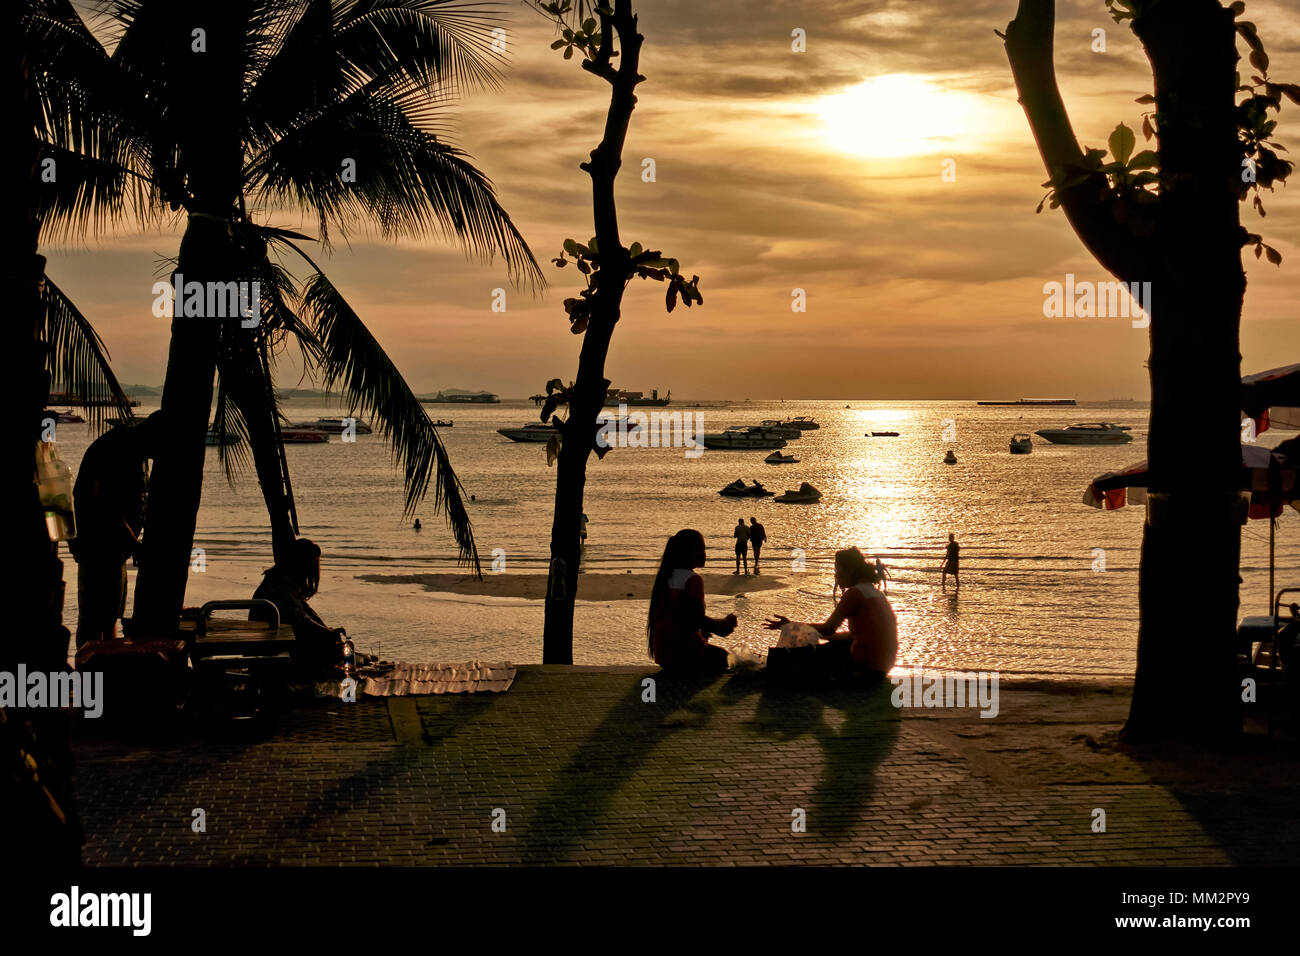 Tropical Sunset at Pattaya beach with people overlooking the Ocean. Thailand, Southeast Asia Stock Photo